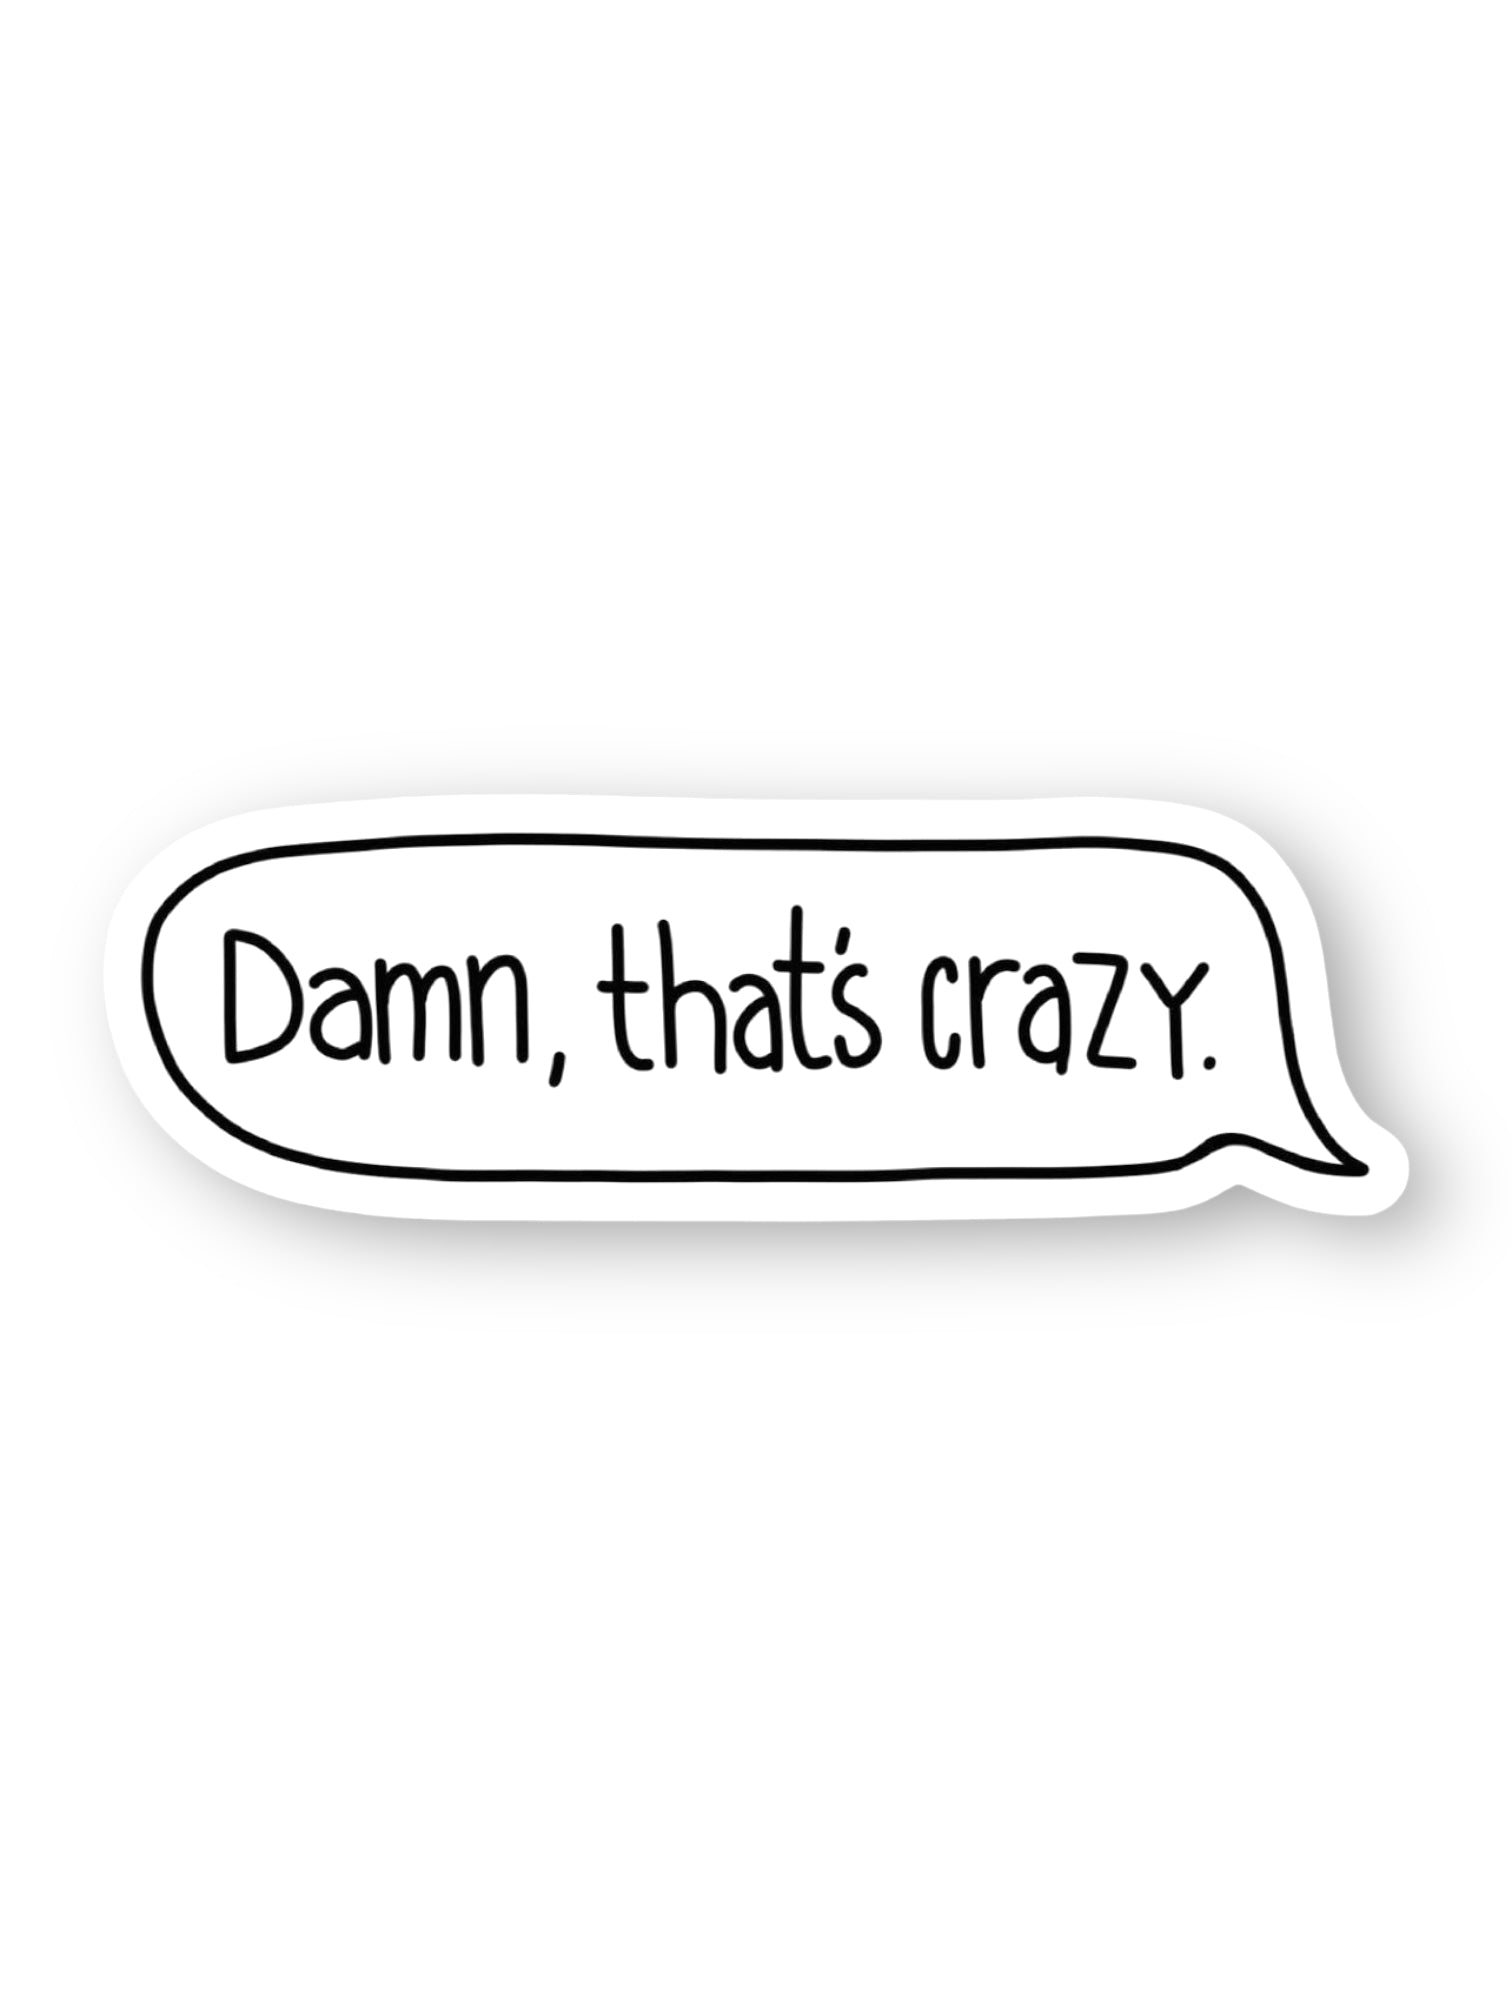 Damn That's Crazy Word Bubble Sticker by Big Moods, Sold by Le Monkey House